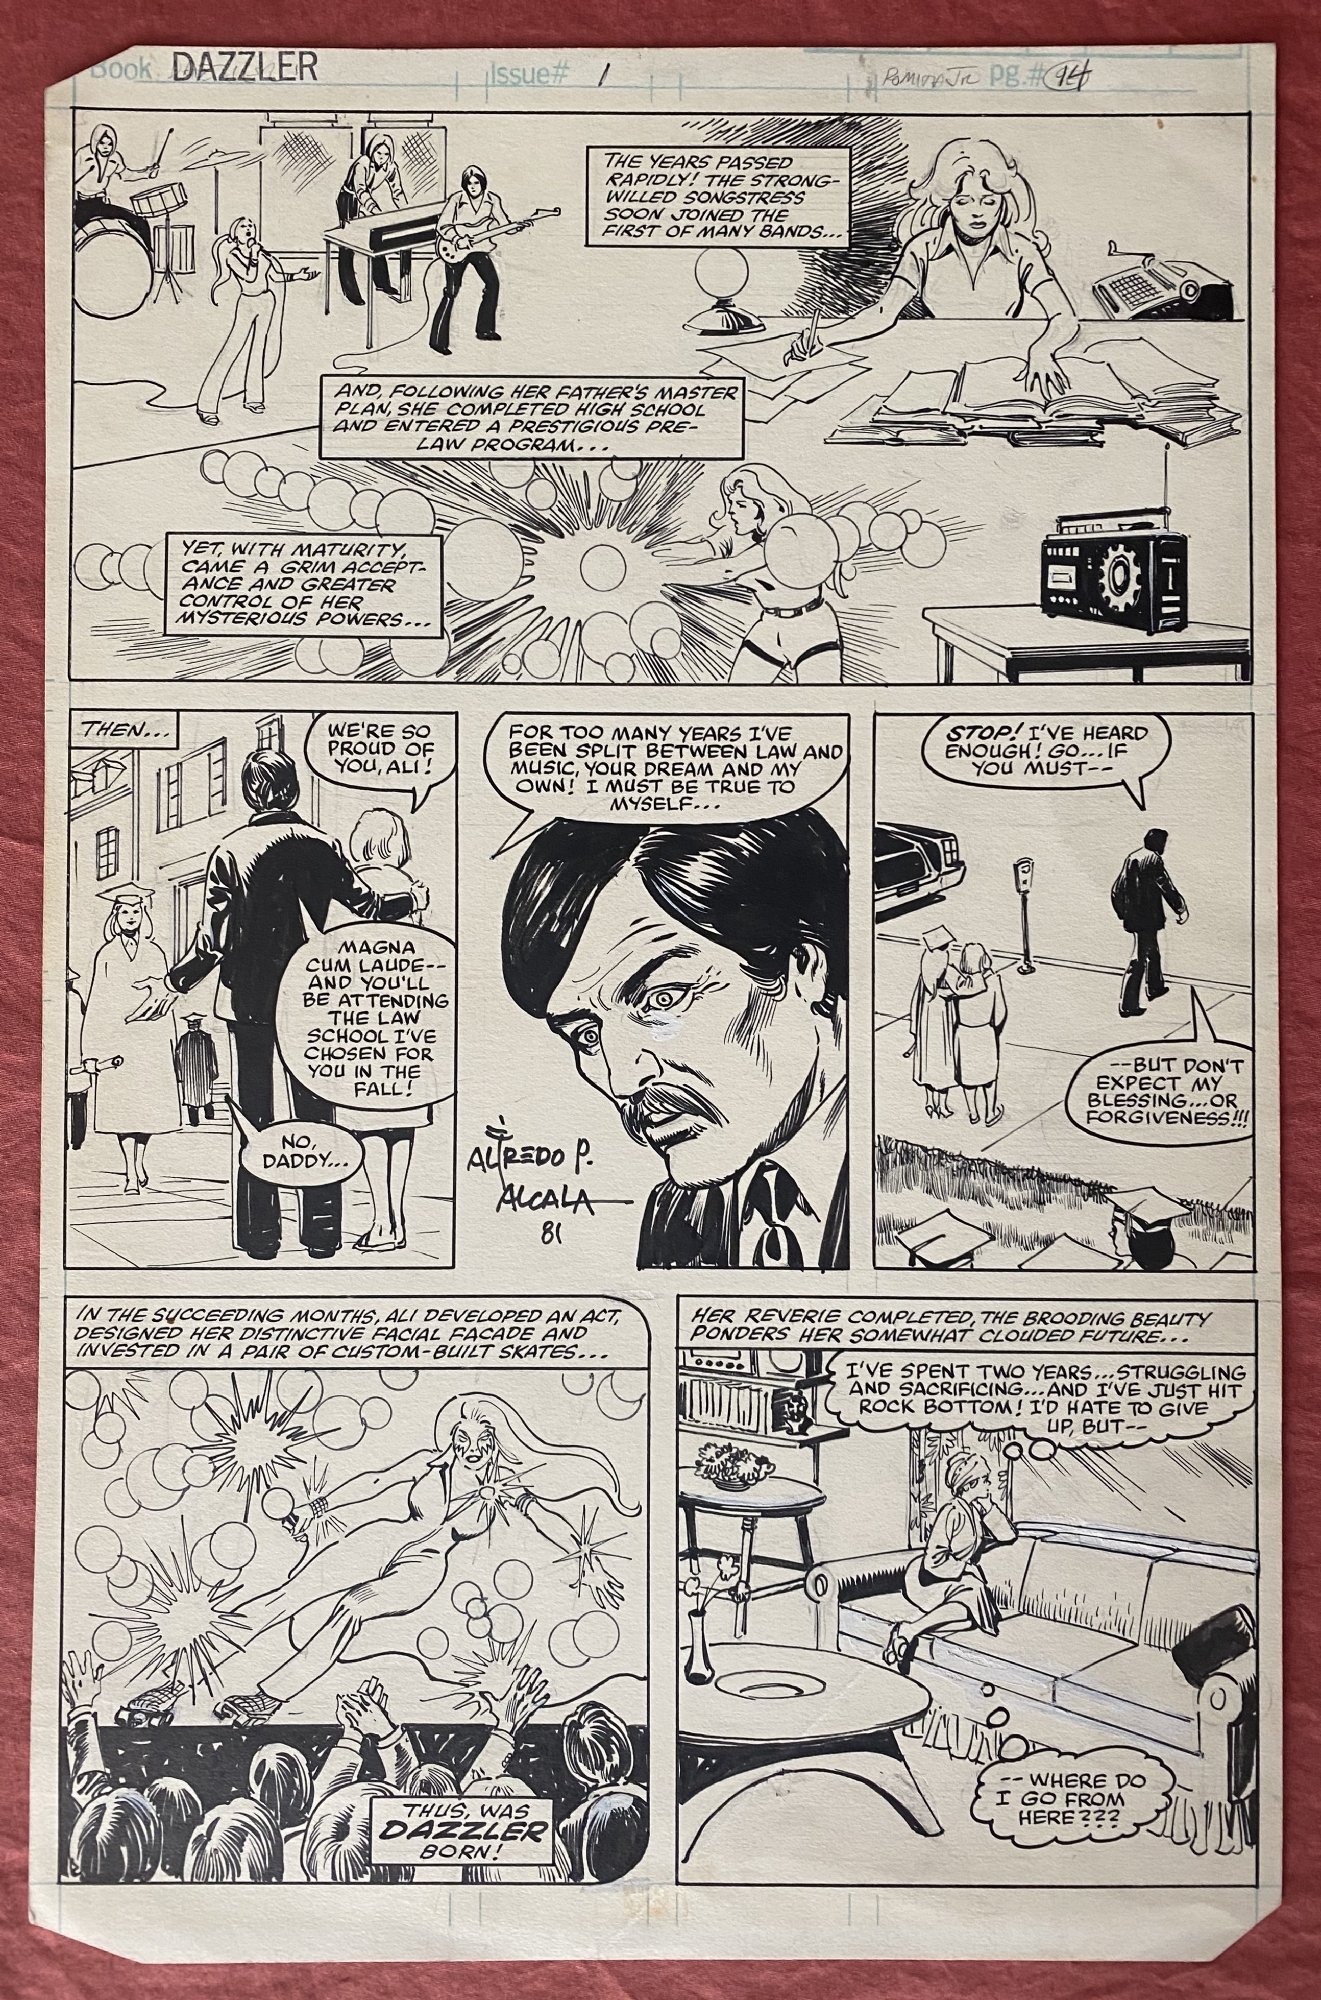 Dazzler 1 Origin Page By John Romita Jr 1981 In Paul P S Other Characters Girls Comic Art Gallery Room